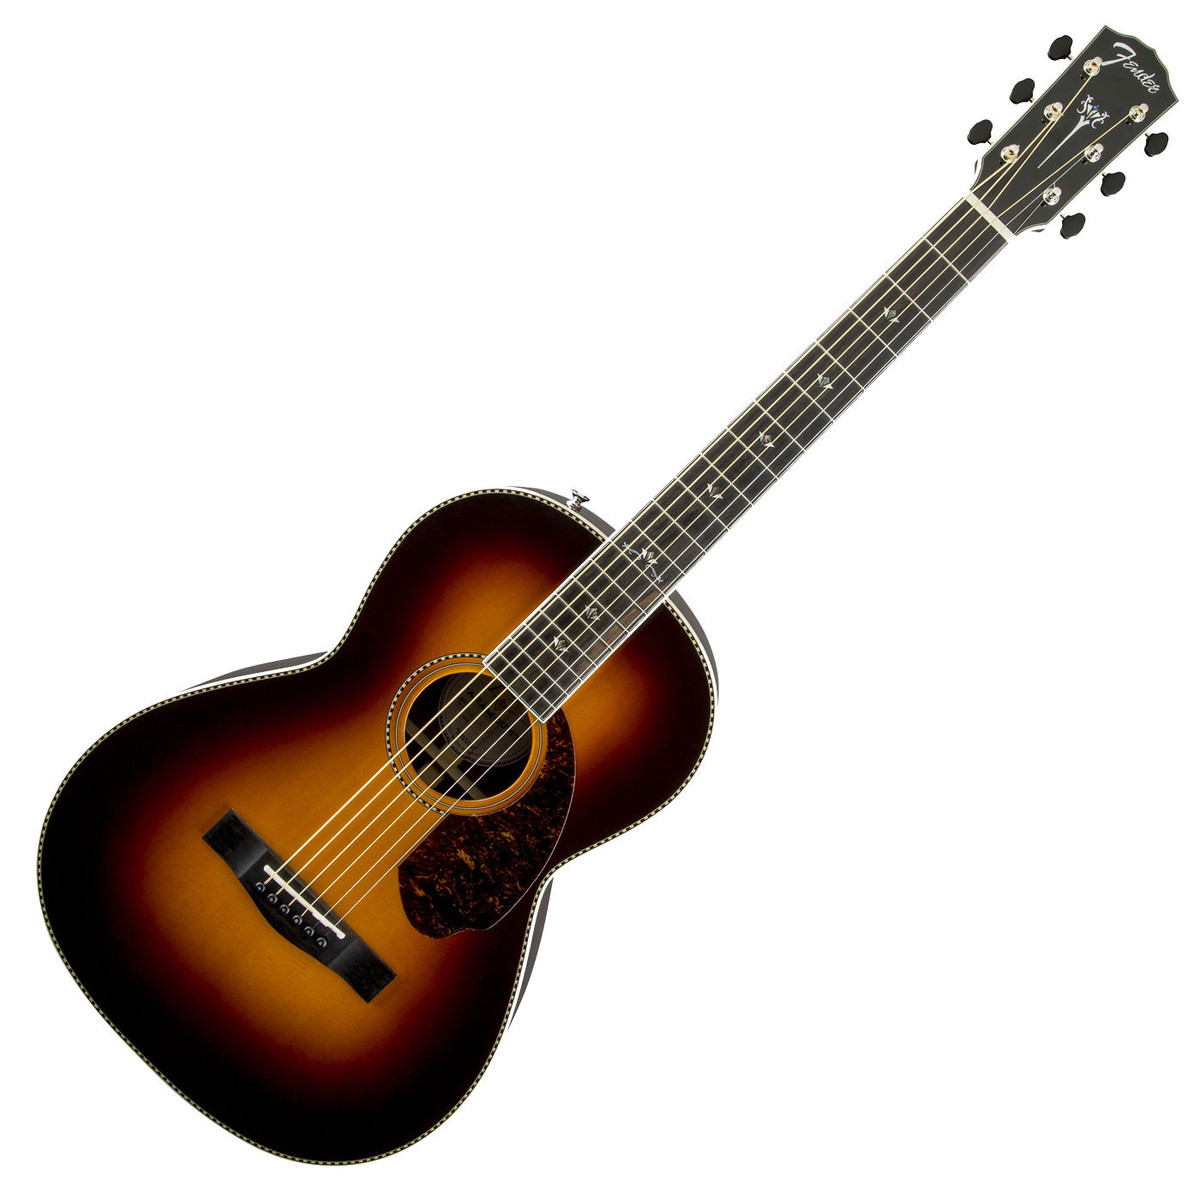 FENDER PARAMOUNT PM-2 DELUXE PARLOR